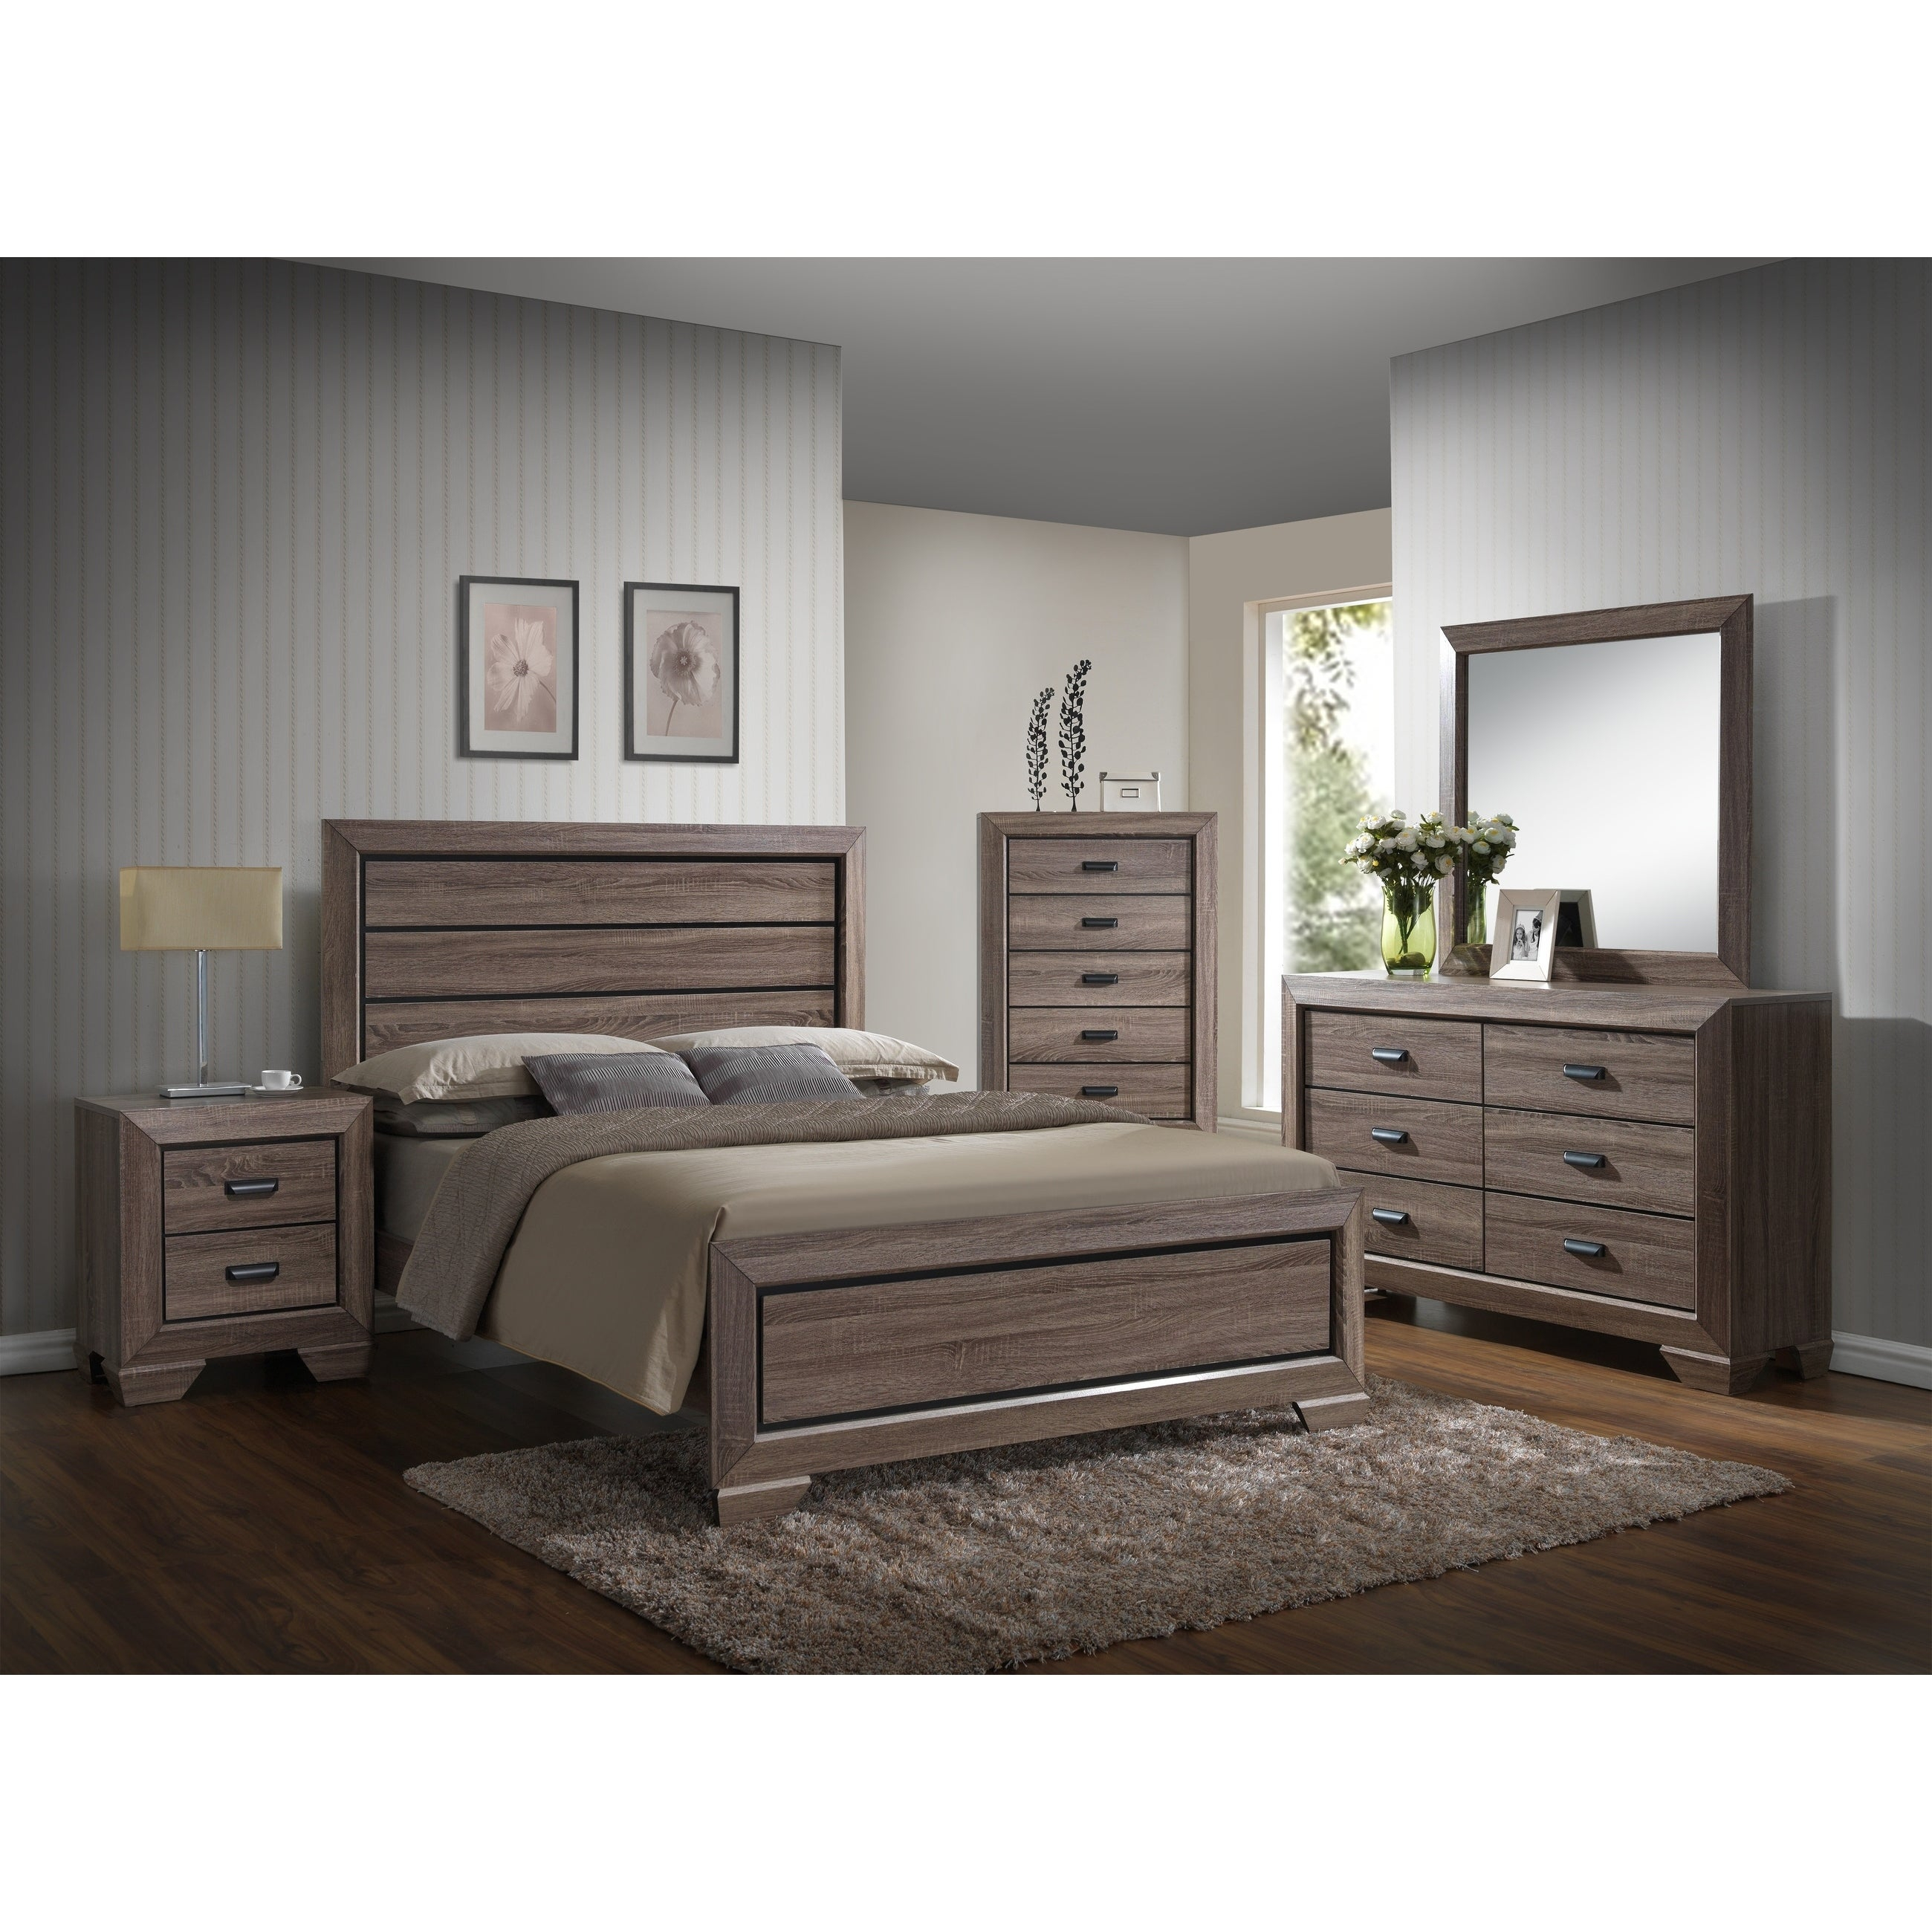 Large Scale Rustic Wooden Grey Queen Bedroom Set throughout dimensions 2600 X 2600